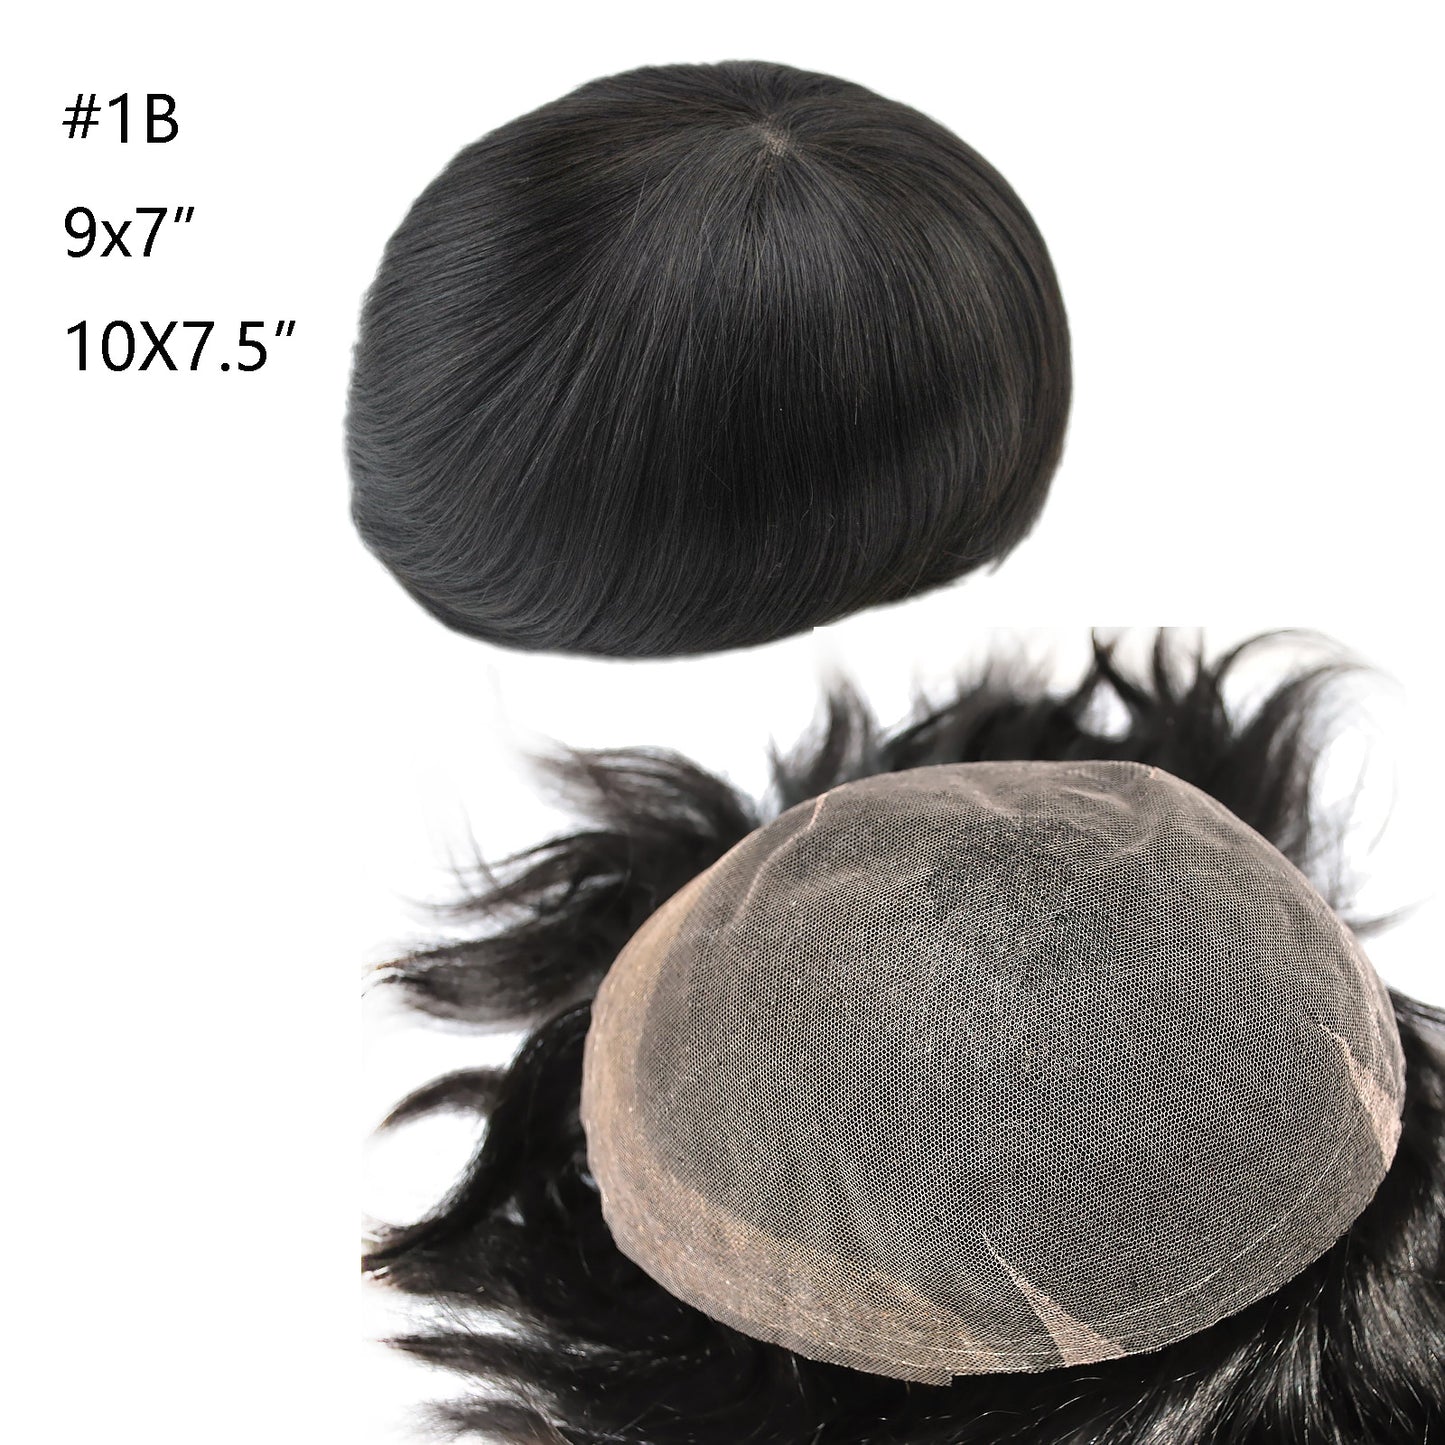 Stock human hair toupee natural black color all Swisslace knots bleached hair system for men